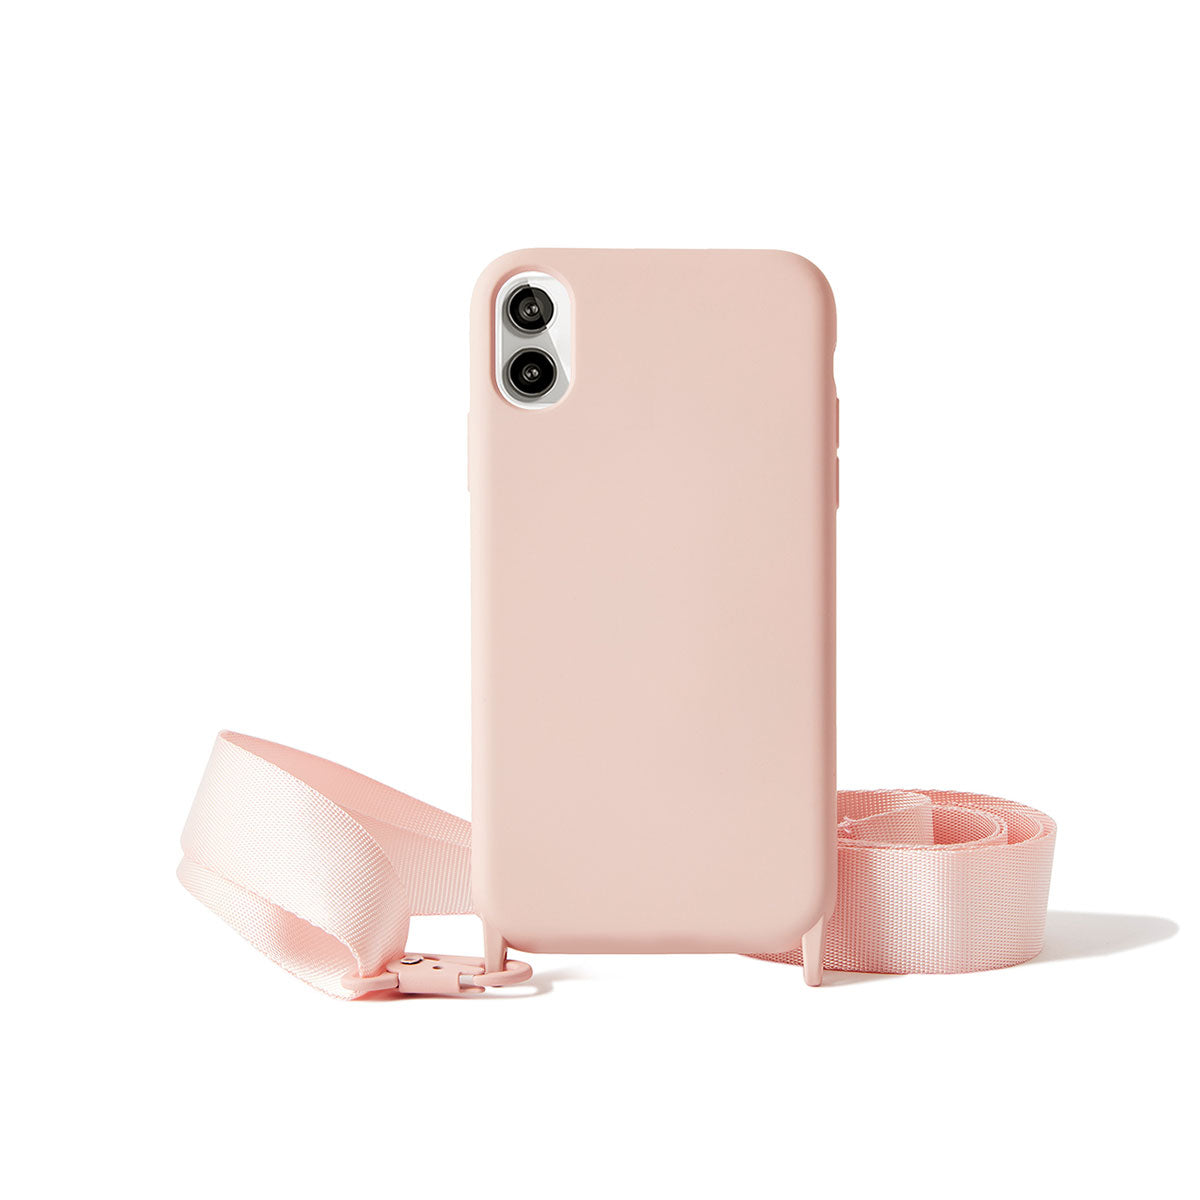 Silicone iPhone X Models